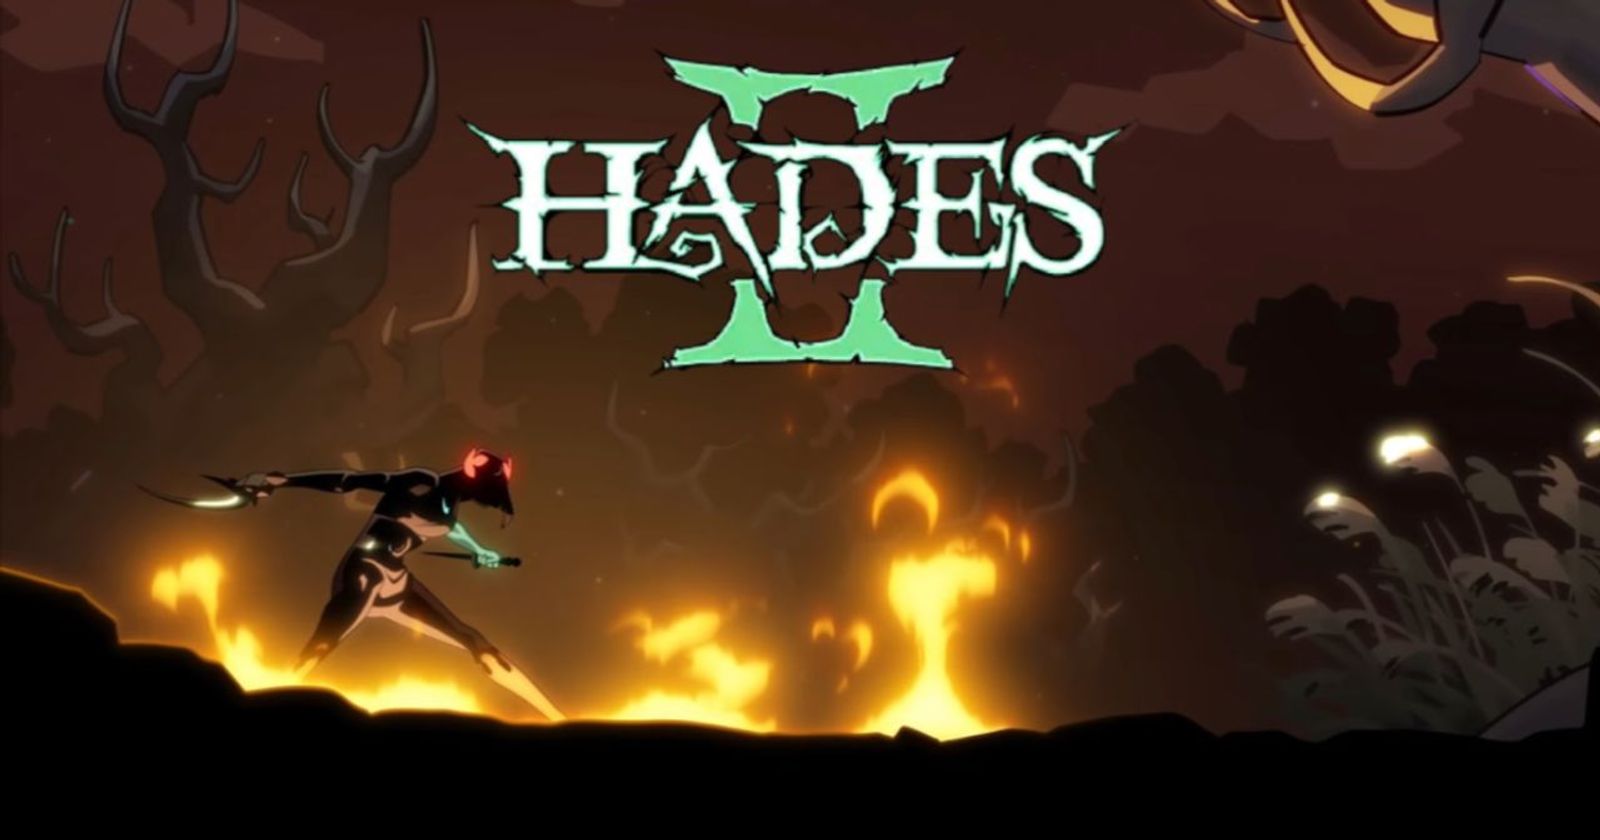 Hades 2' release window, early access, trailer, story, and Melinoë